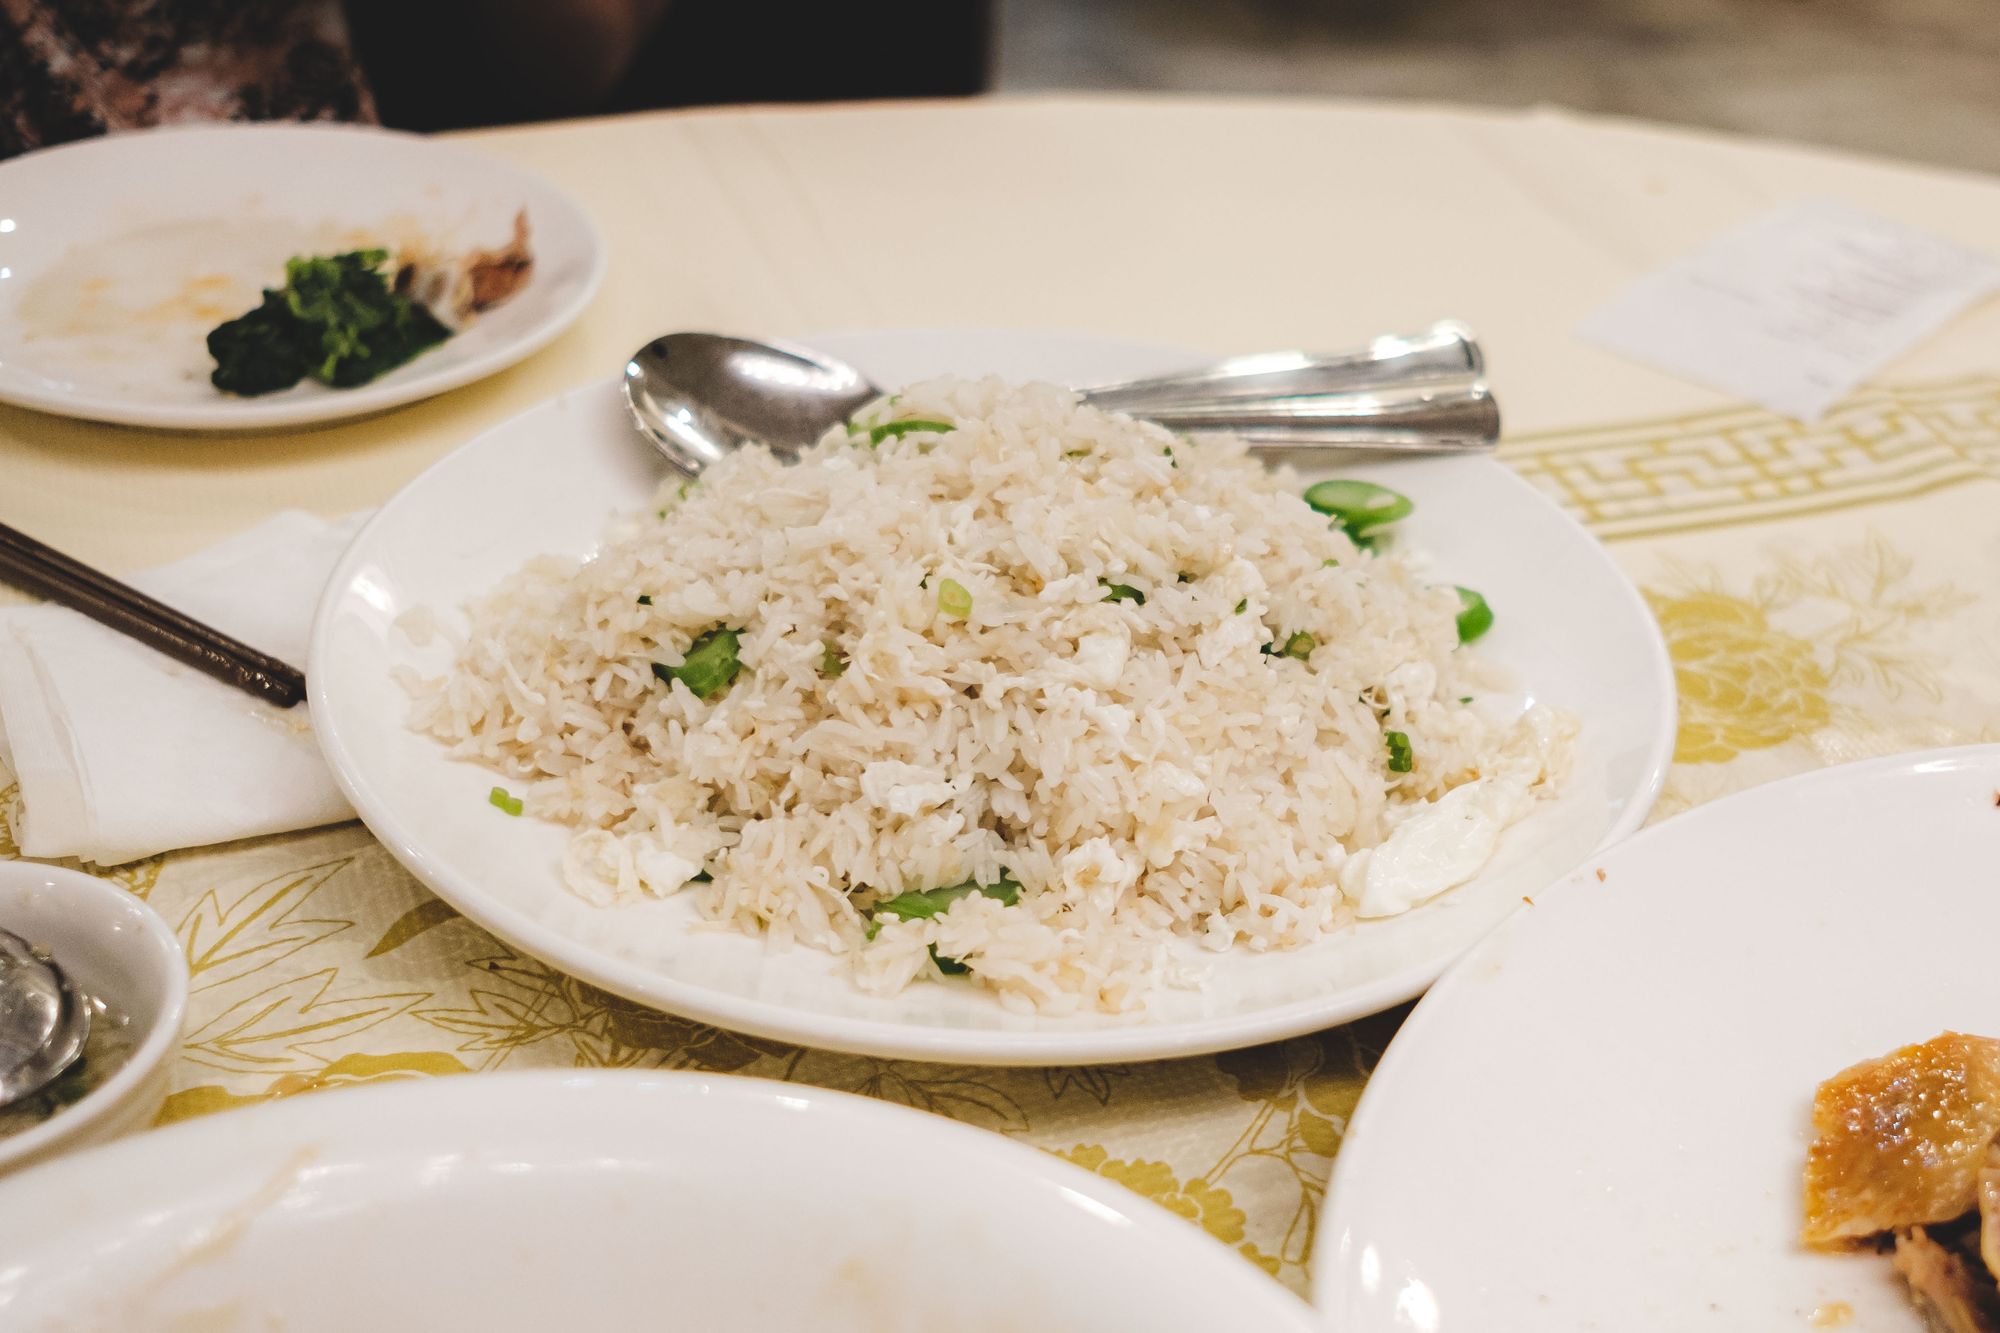 Golden Paramount Seafood Restaurant – Fried Rice with Dried Scallop